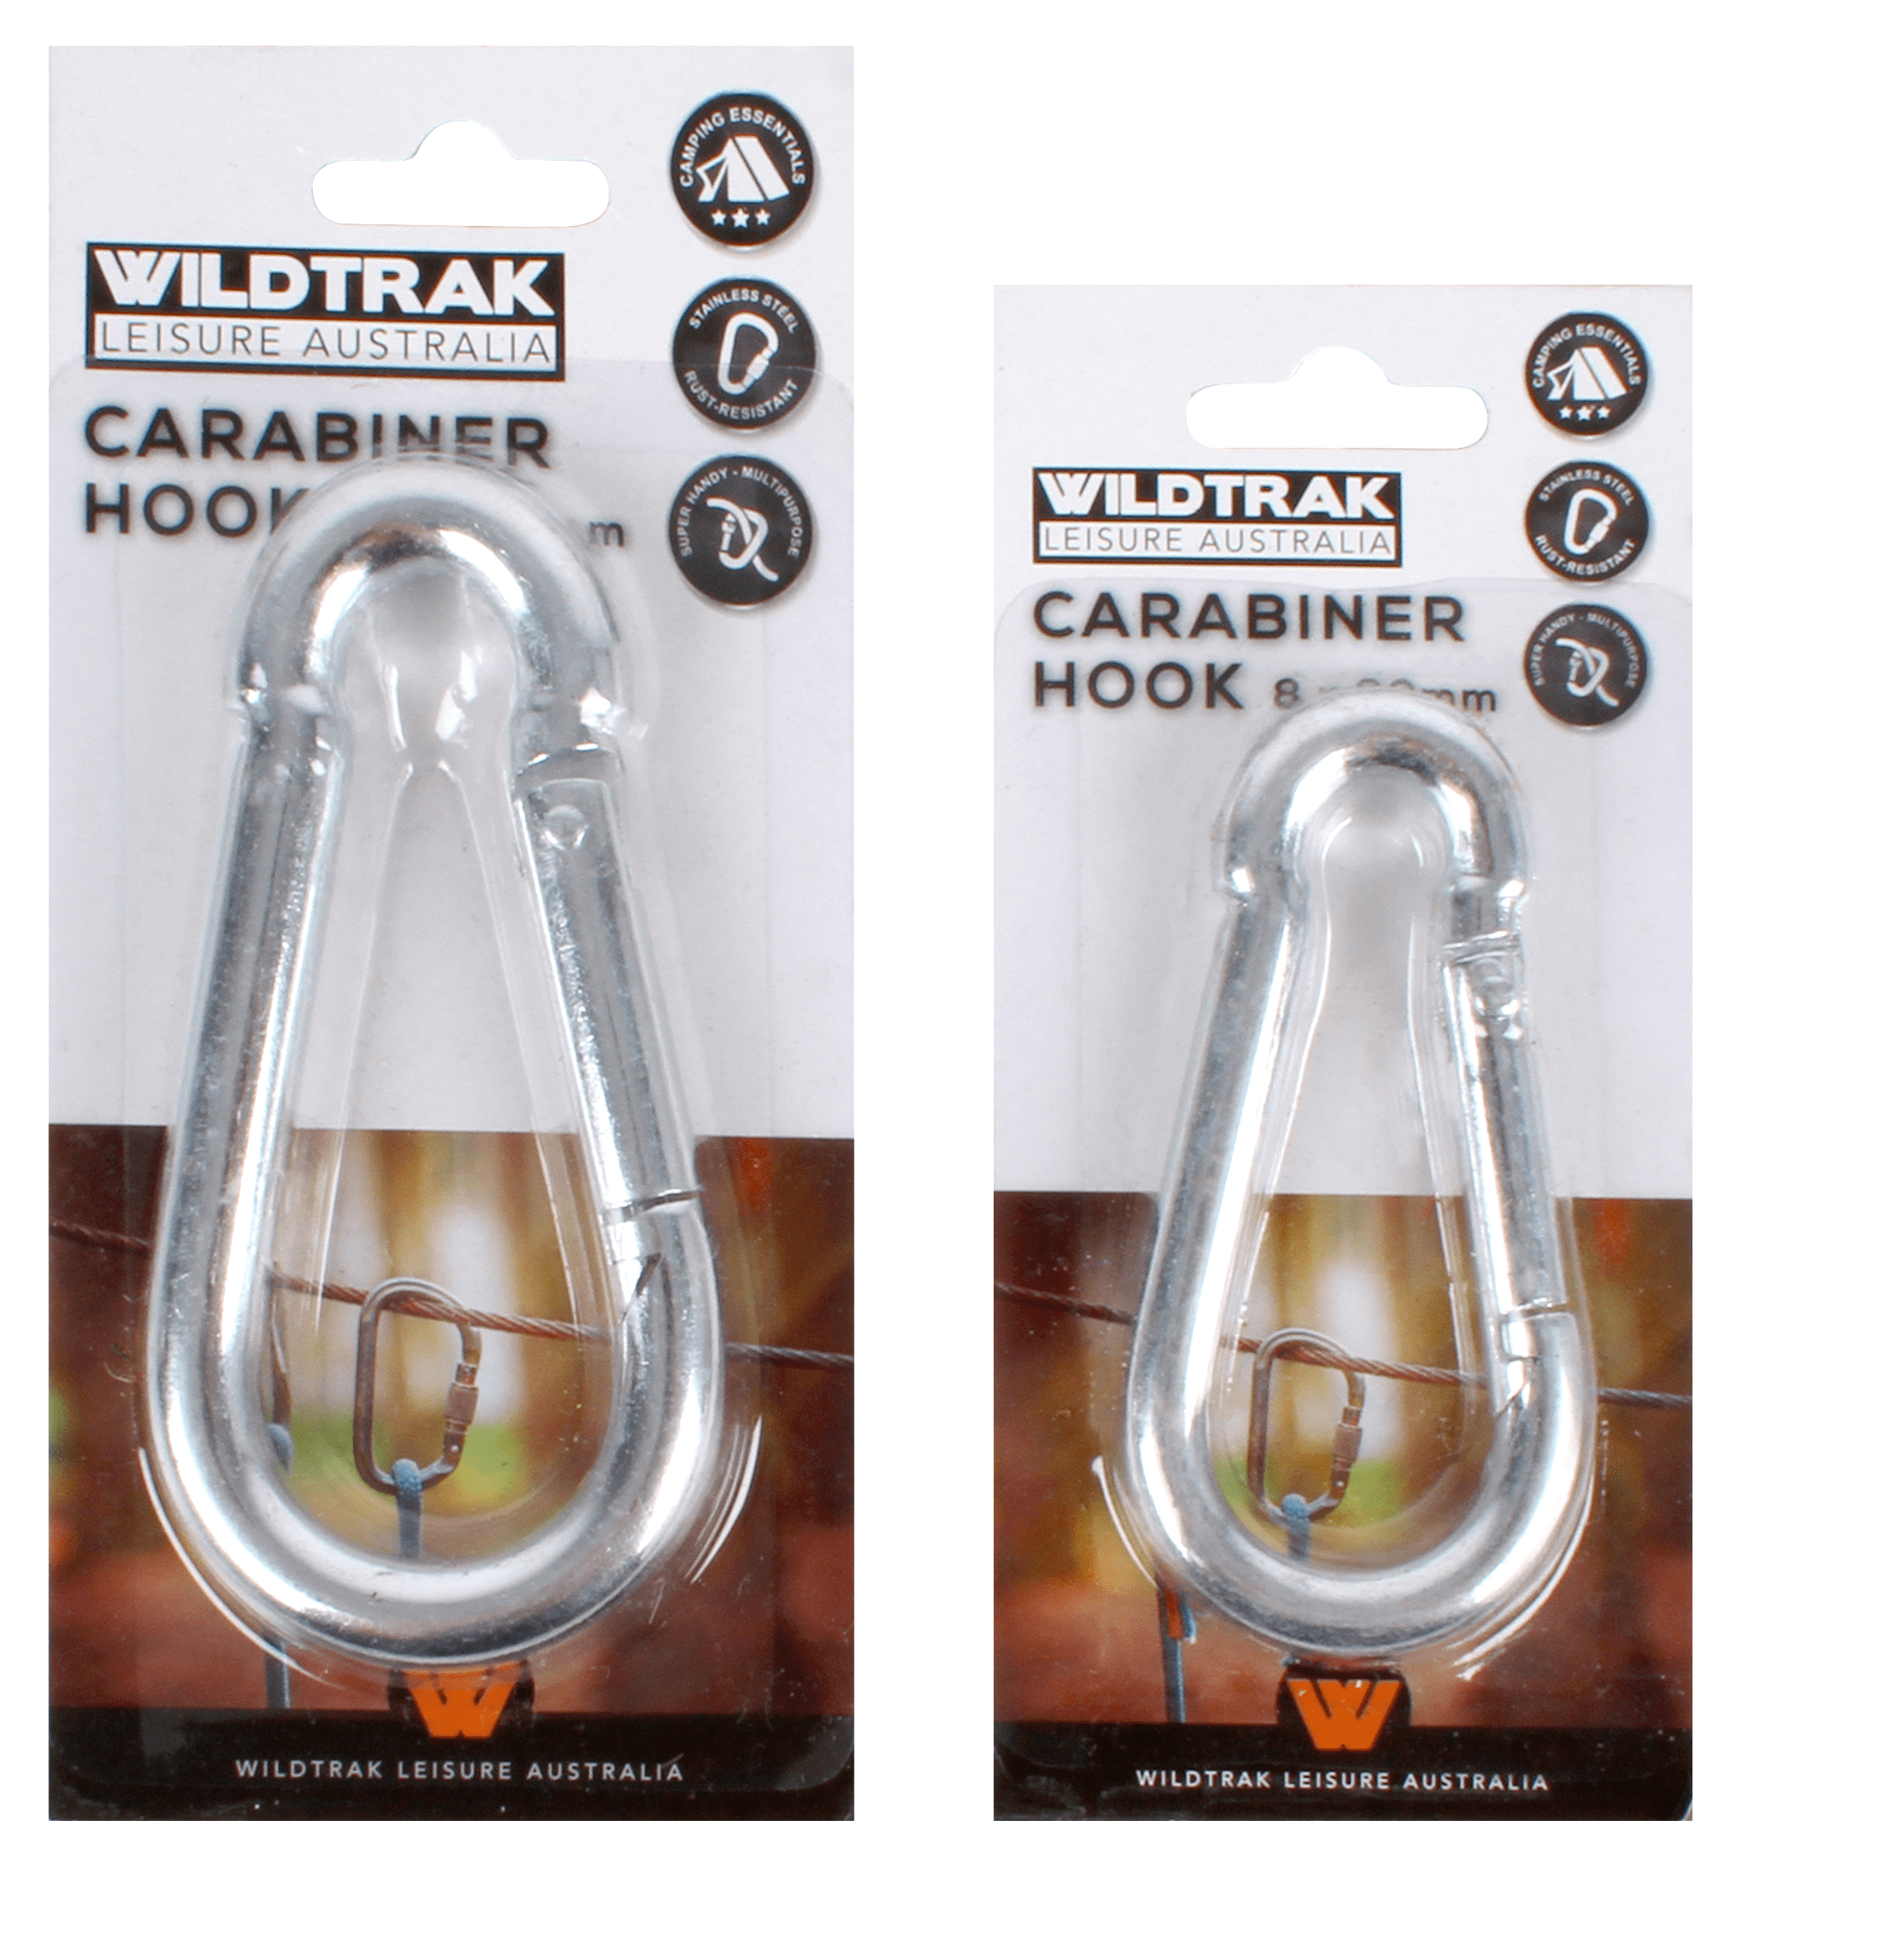 3 ASSORTED SIZE CARABINER CLIPS